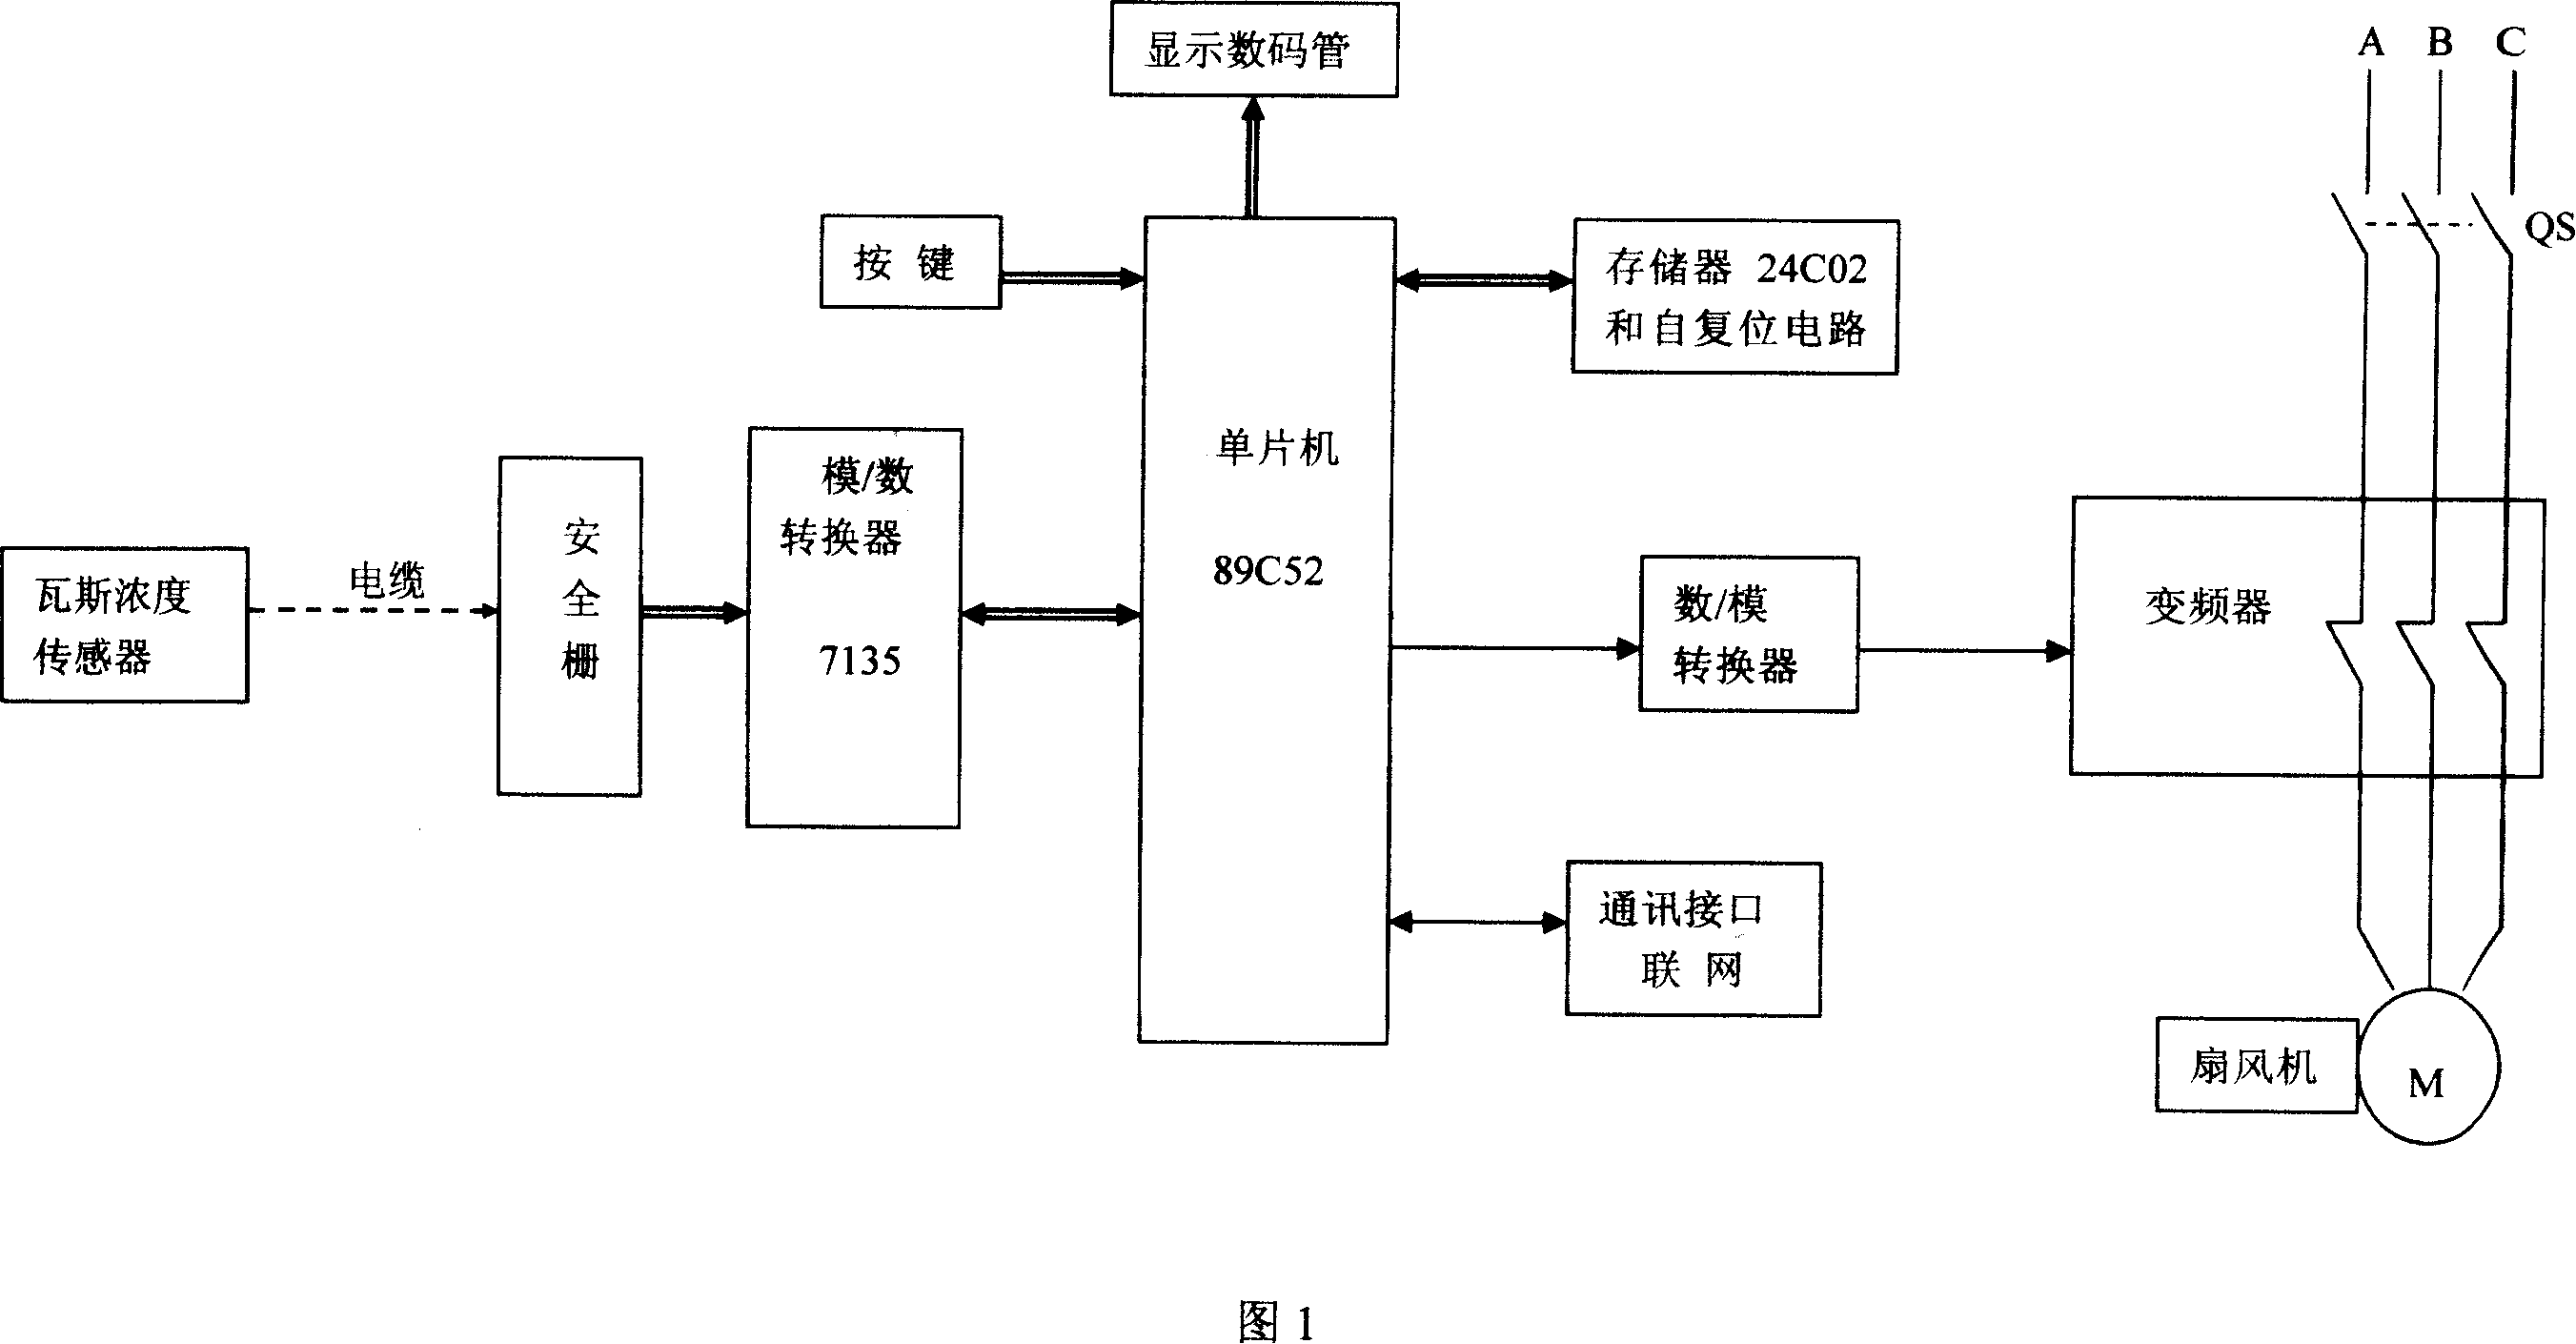 Coal mine gas detecting and draught fan automatic control device